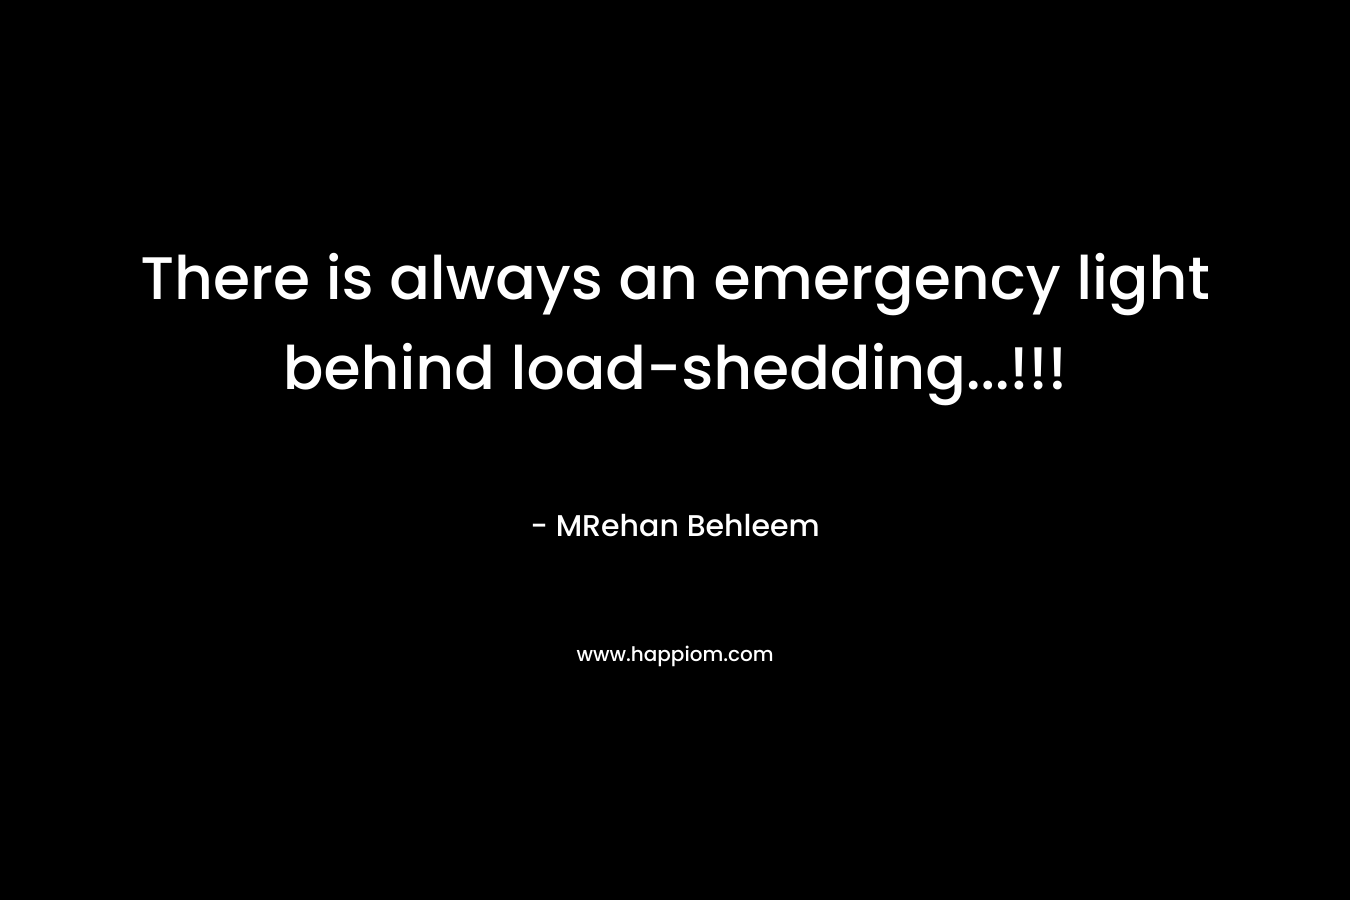 There is always an emergency light behind load-shedding...!!!